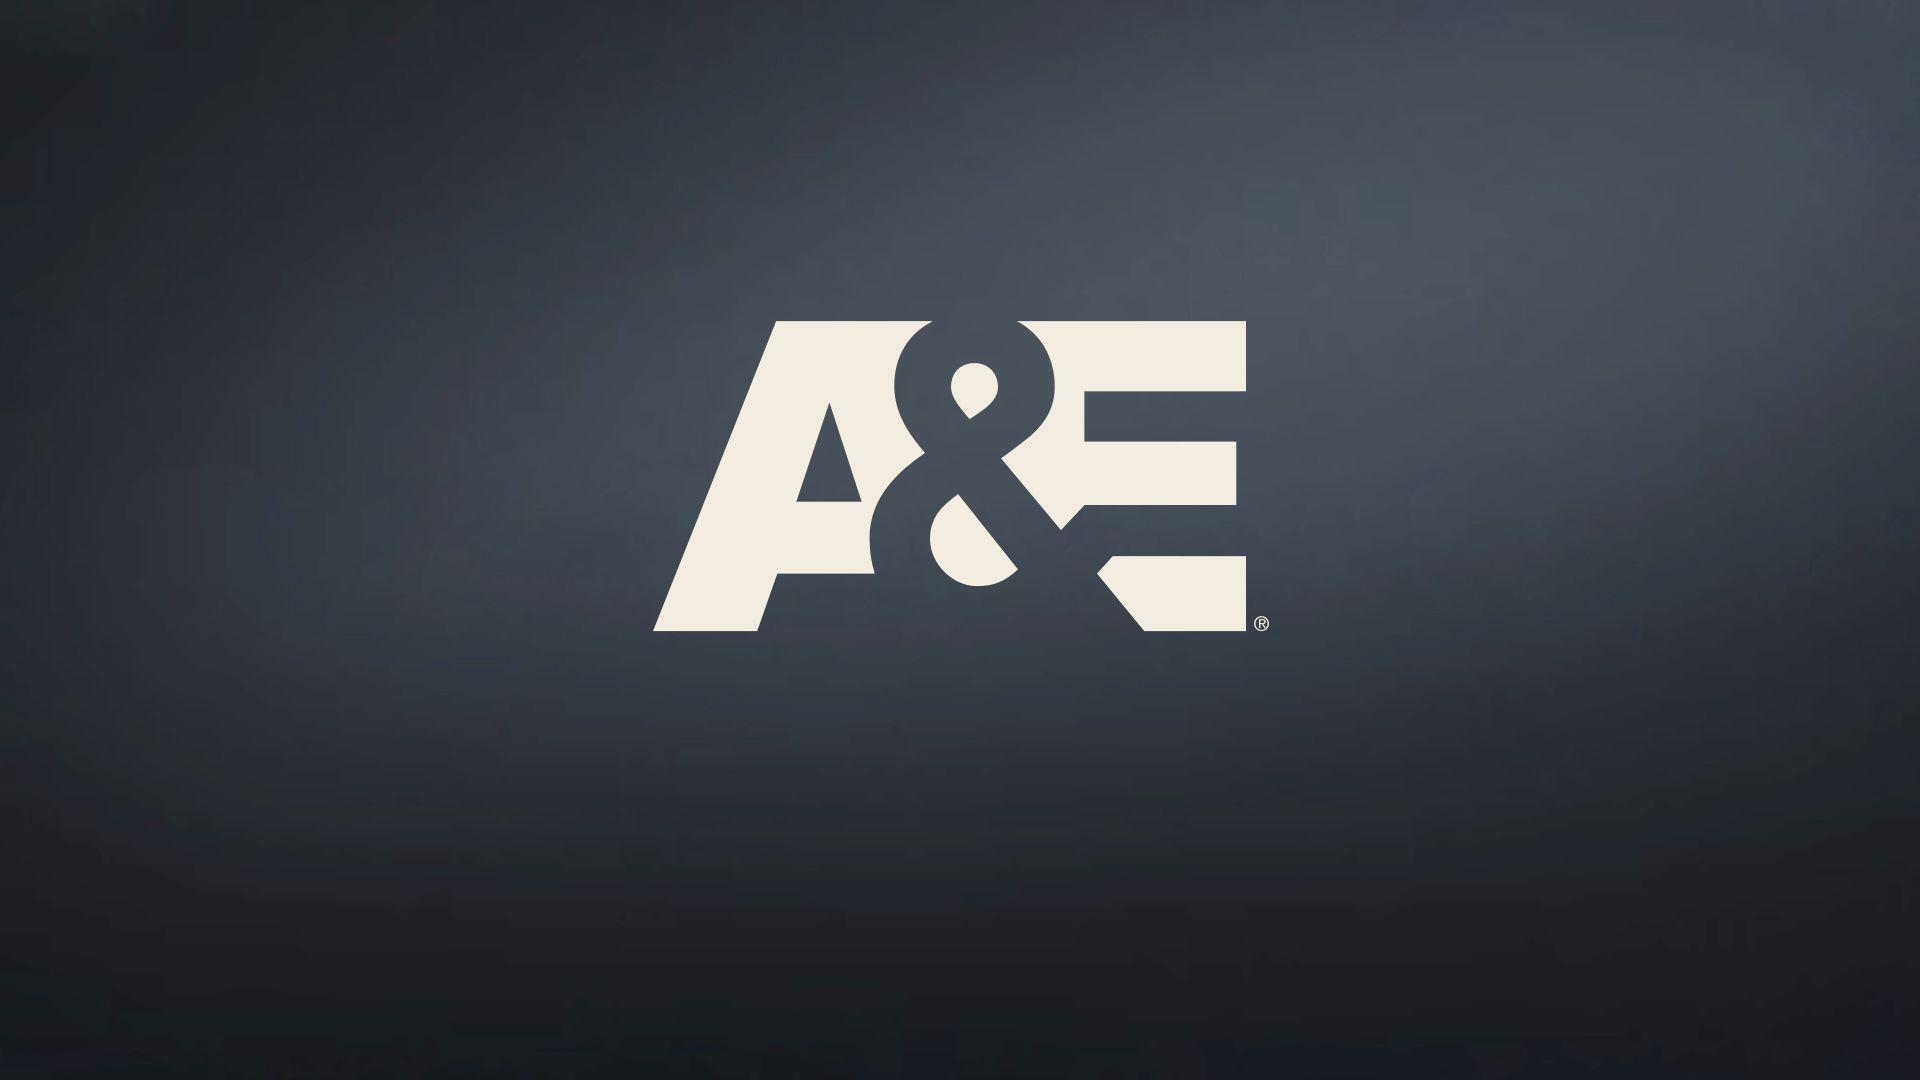 AETV Logo - A&E | Watch Full Episodes of Your Favorite Shows